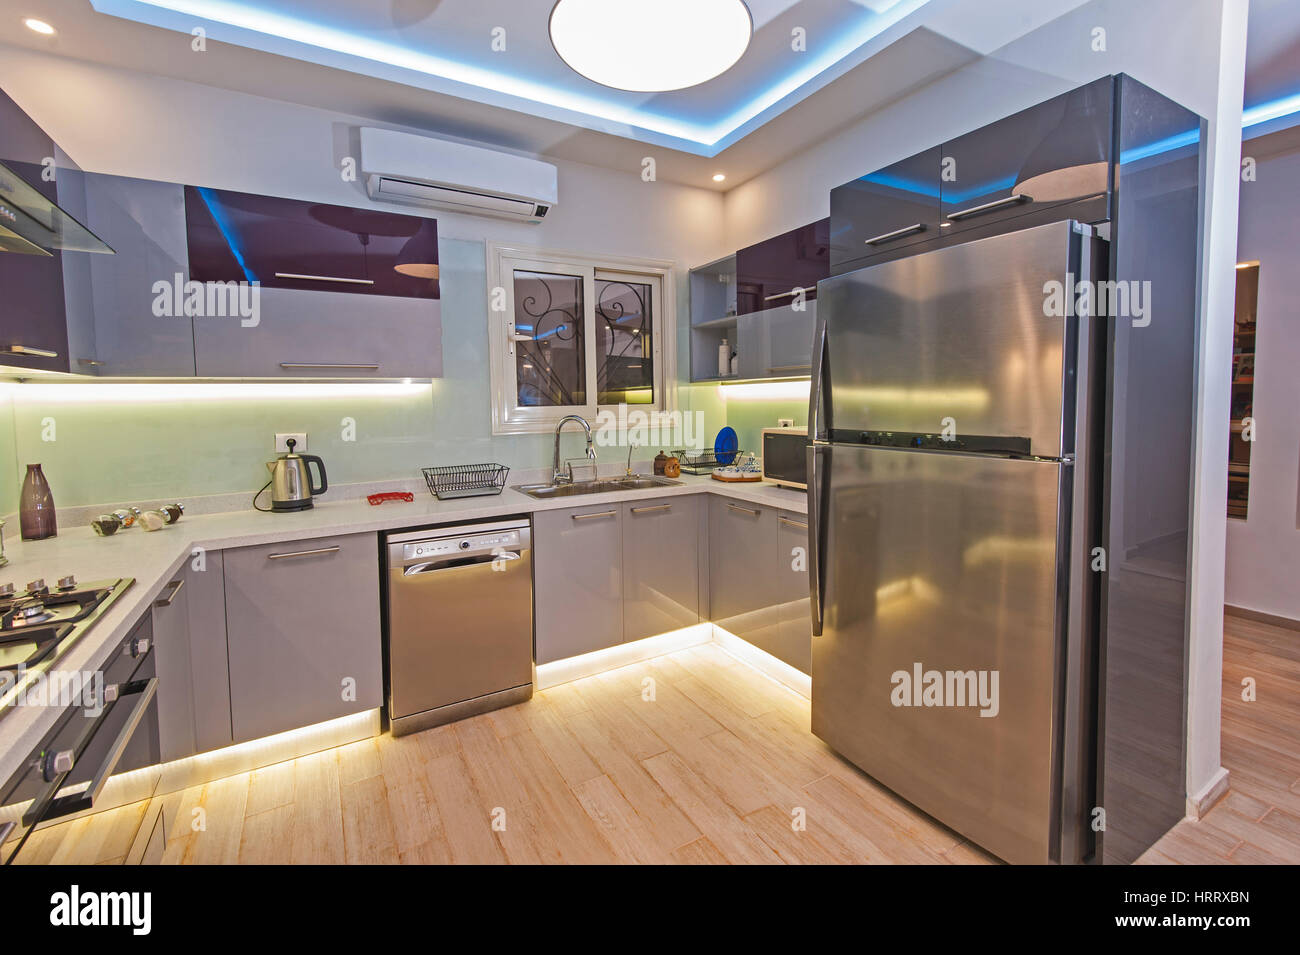 Interior design decor showing modern kitchen and appliances in luxury apartment showroom Stock Photo